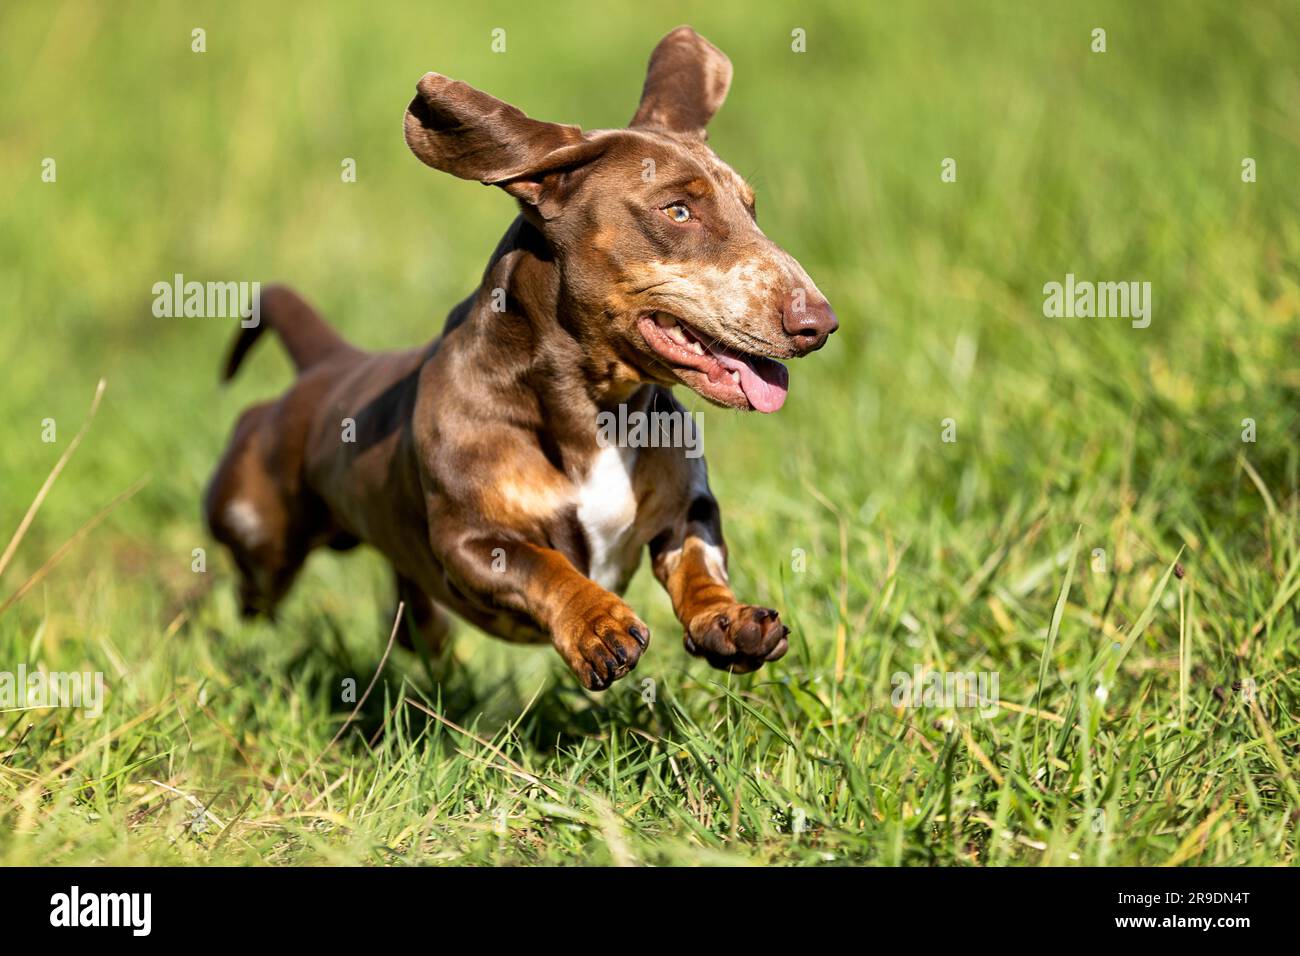 Short-haired brindle Dachshund. Adult male running in a meadow. Germany Stock Photo